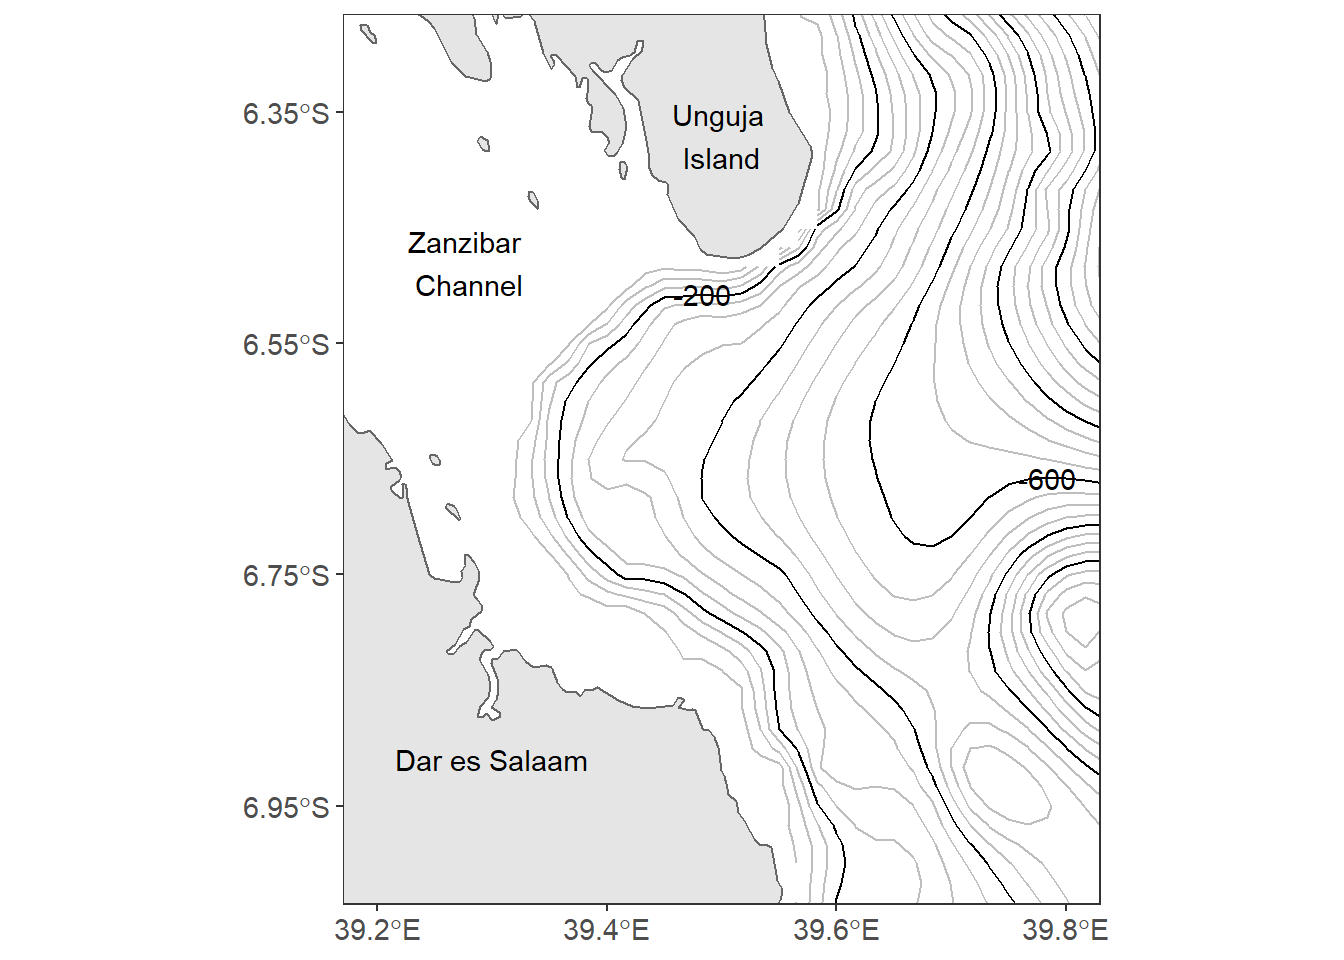 Map of Off-Kimbiji showing contour lines. The grey lines are contour at 50 m interval and the black line are contoured at 200 m intervals